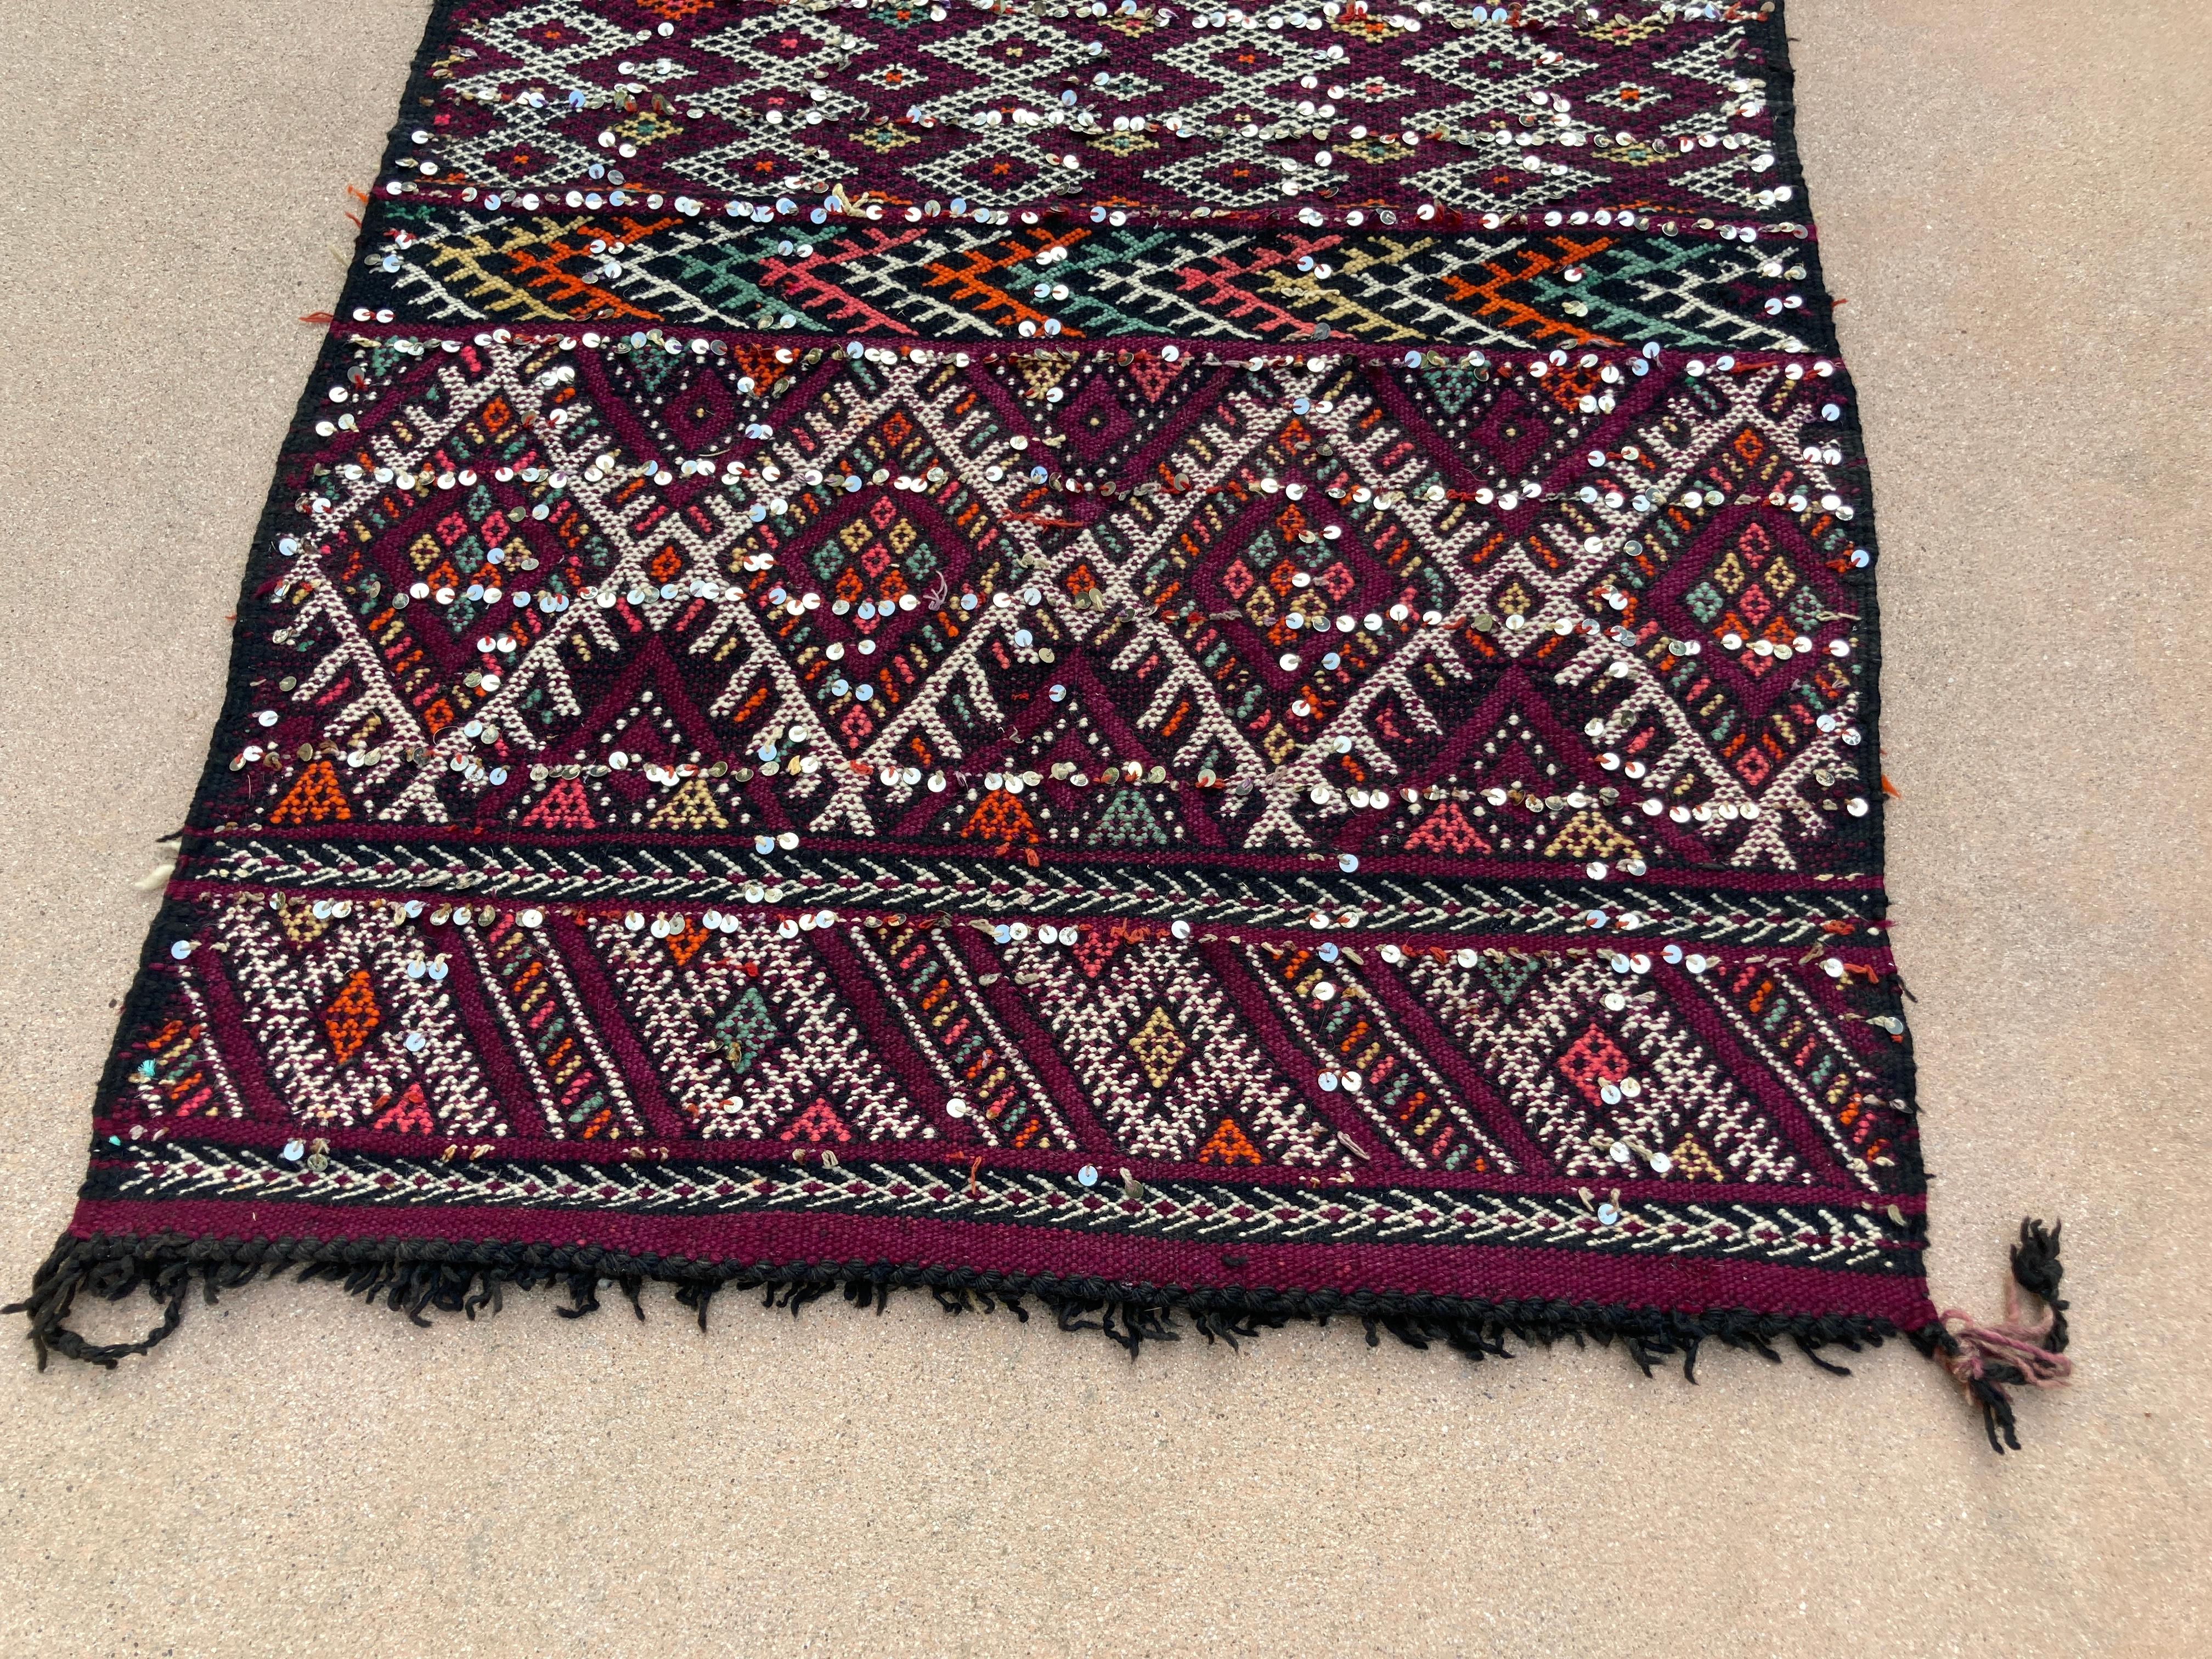 1940s Moroccan Tribal Rug African  Ethnic Textile Floor Covering.
Vintage semi antique, Moroccan tribal rug, nomadic African Tuareg rug, wool and cotton embroidered geometrical modernist designs and adorned with sequins.
22 ft Moroccan runner ethnic